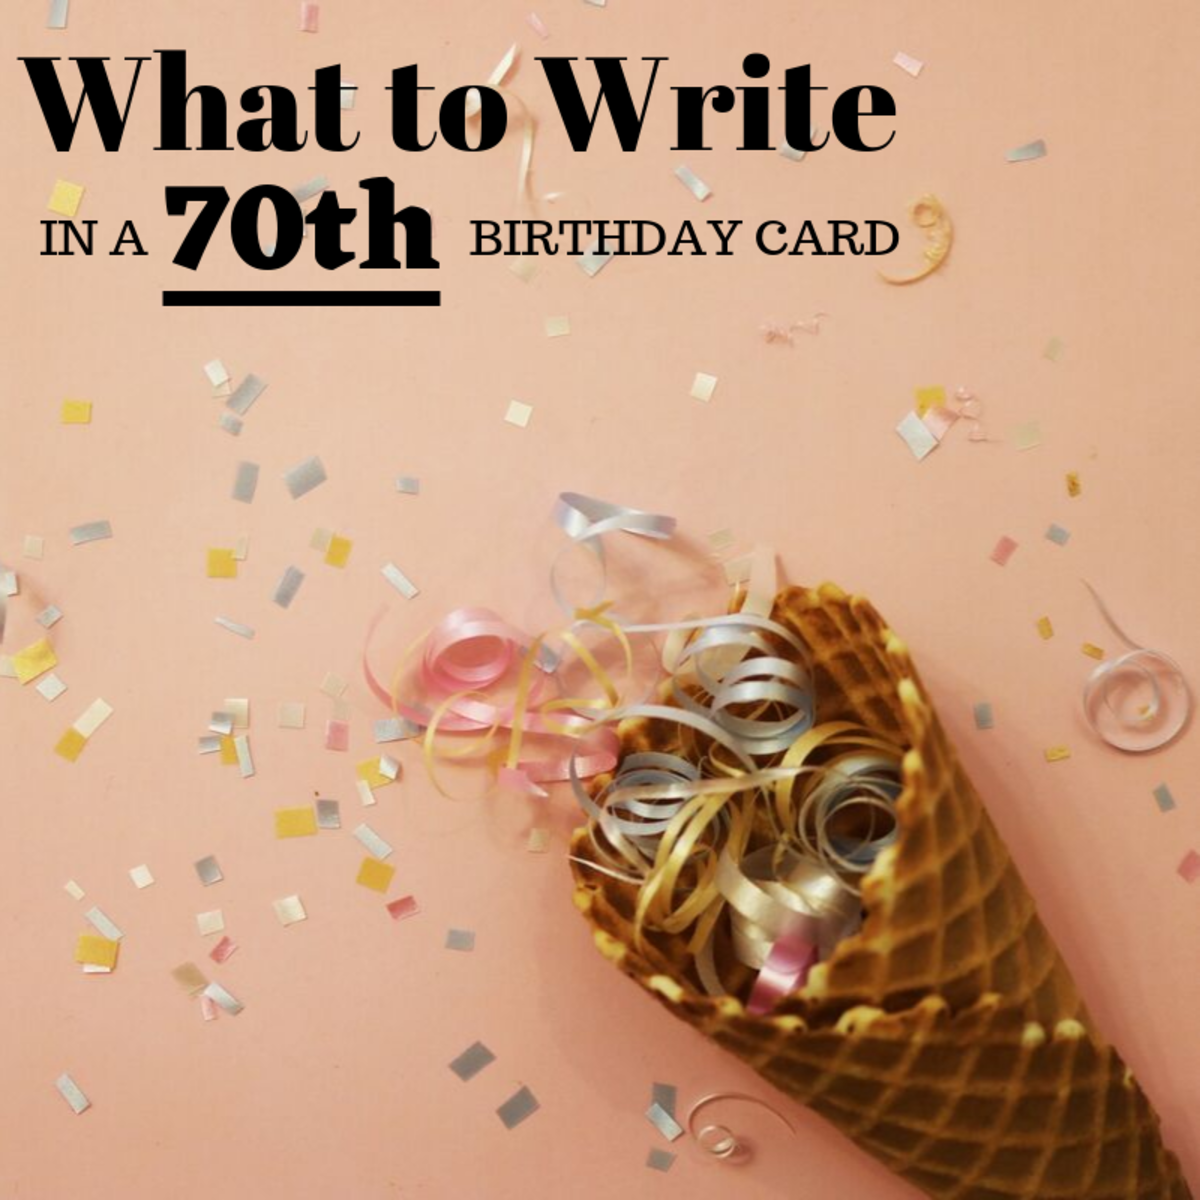 70th-birthday-wishes-sayings-and-quotes-to-write-in-a-card-holidappy